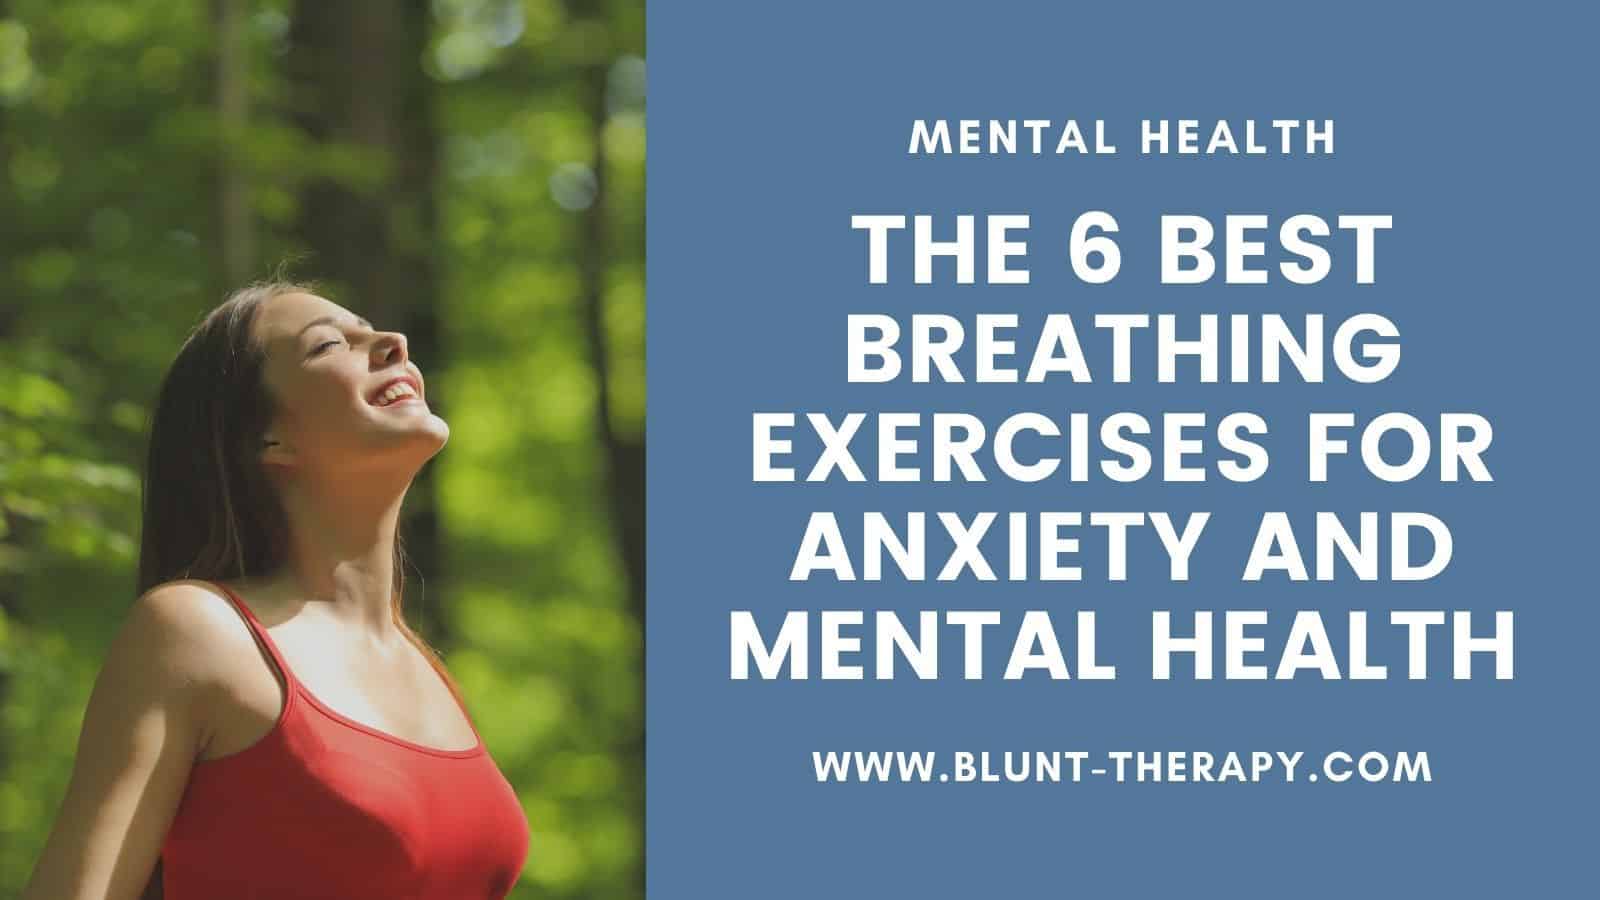 The 6 Best Breathing Exercises for Anxiety and Mental Health